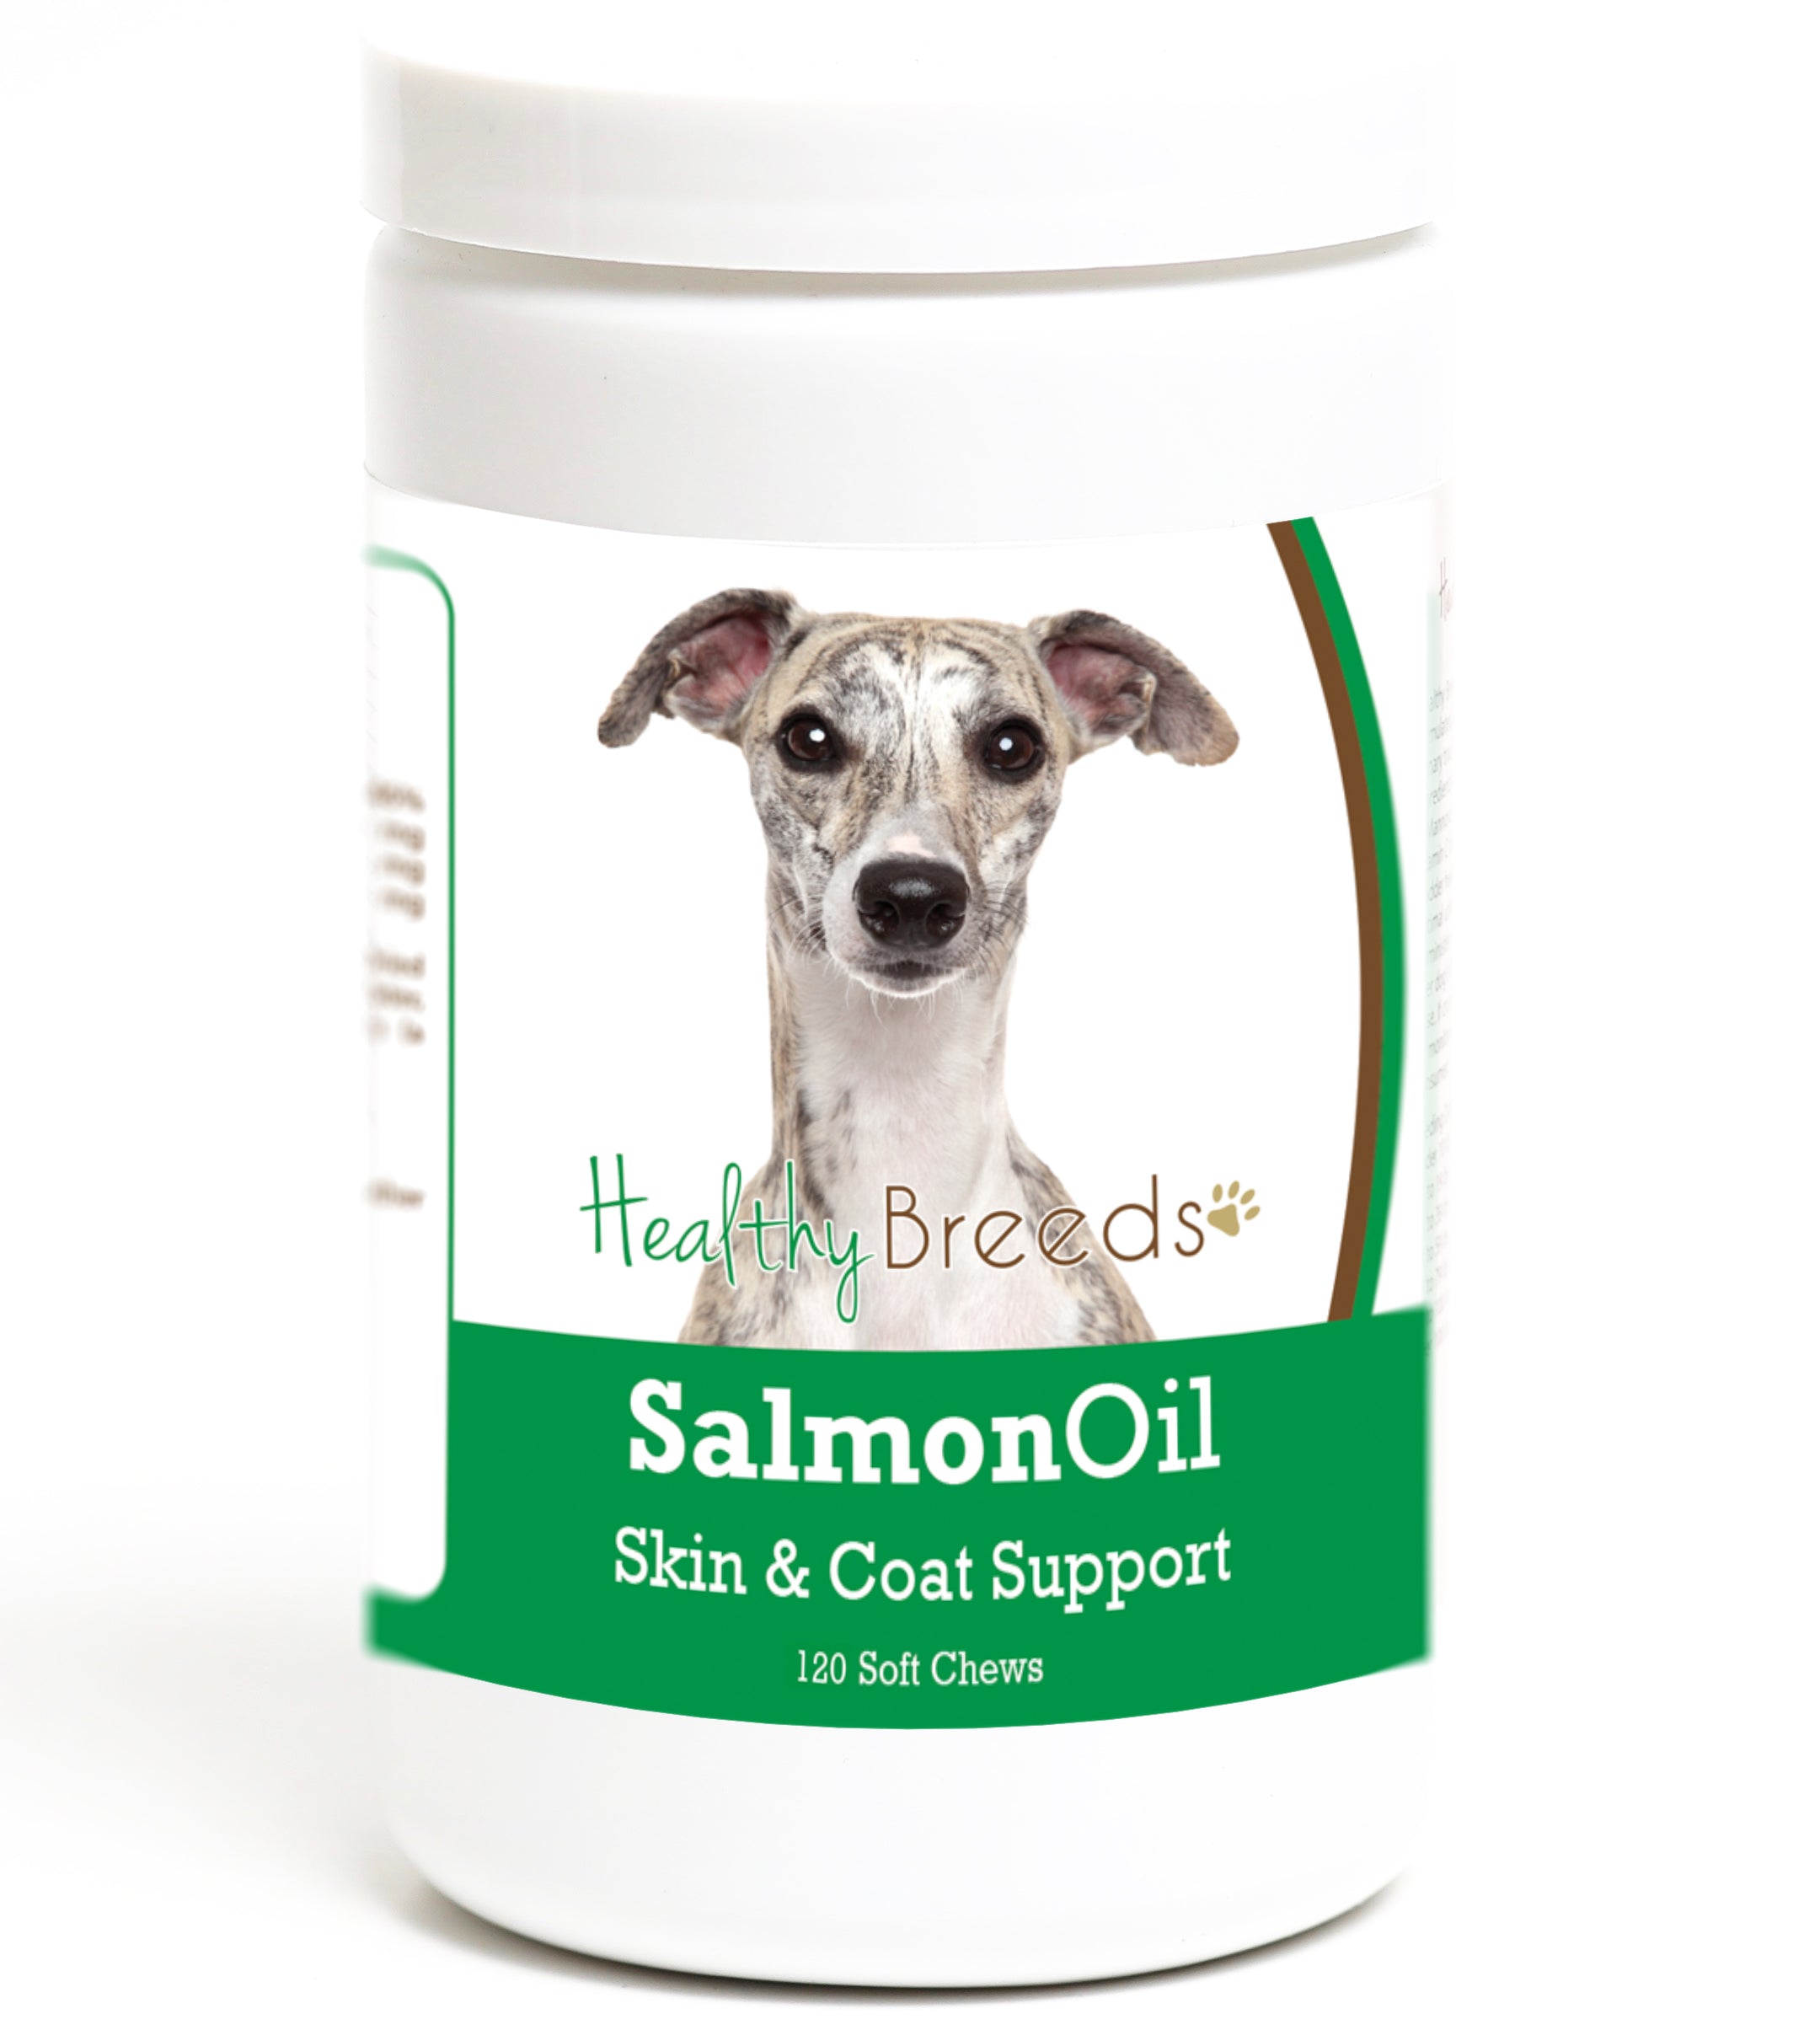 Whippet Salmon Oil Soft Chews 120 Count